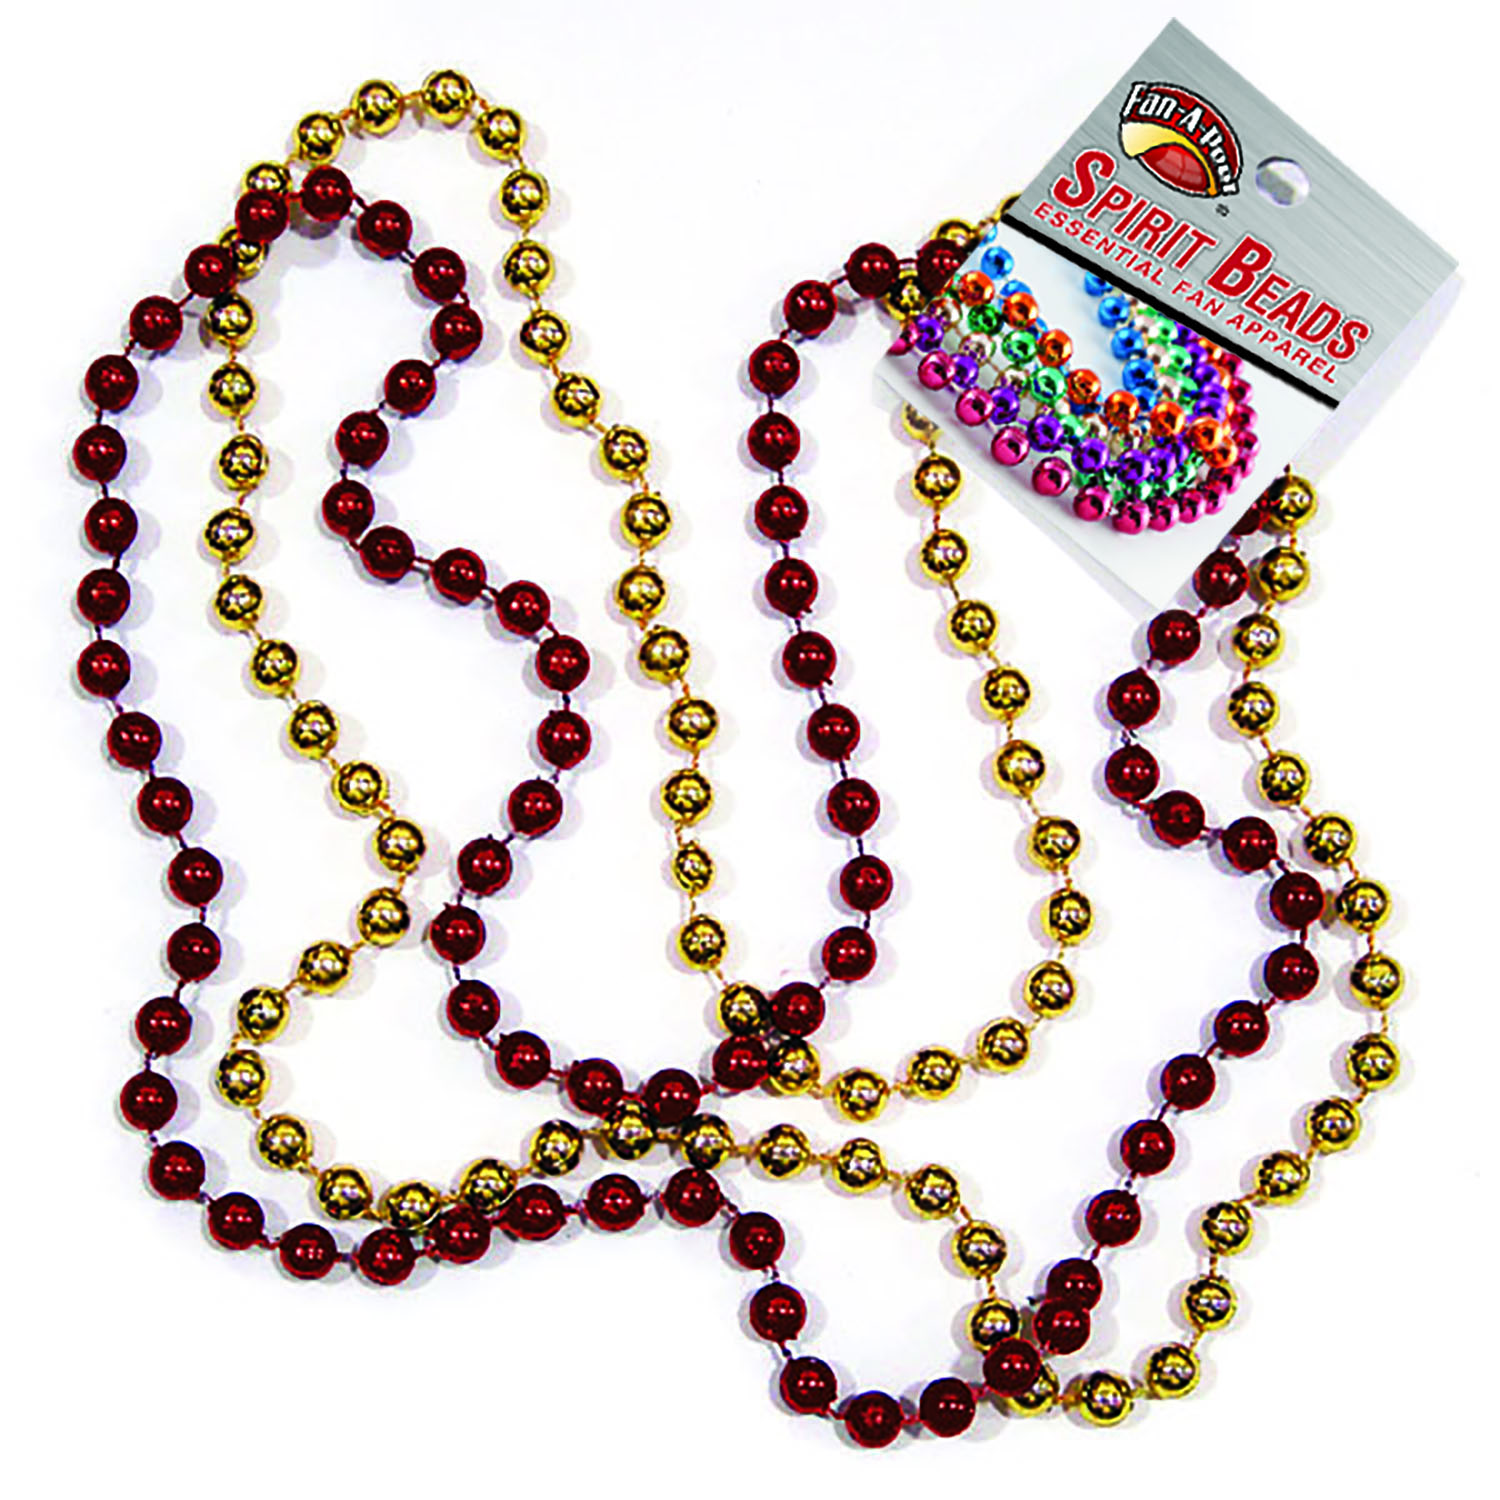 Spirit Beads By Fan-A-Peel - Maroon & Gold Bead Necklaces Two Pack